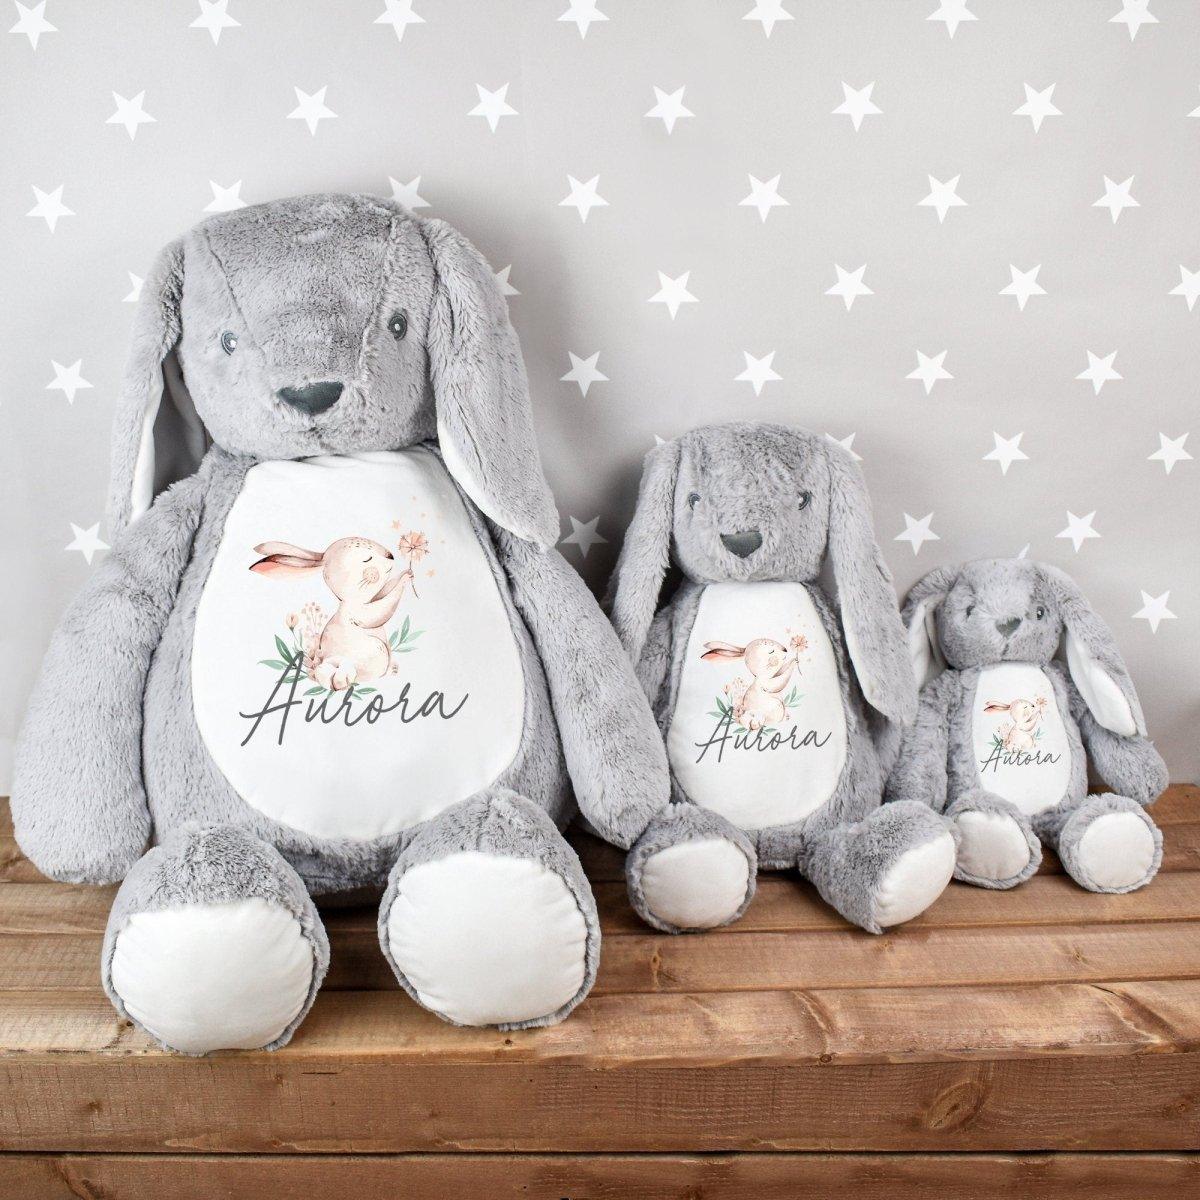 Personalised Easter Bunny, Customised Easter Teddy, Plush Bunny Soft Toy, Easter Baby Gifts, New Baby Cuddly Toy, Easter Bunny Rabbit Gift - Amy Lucy